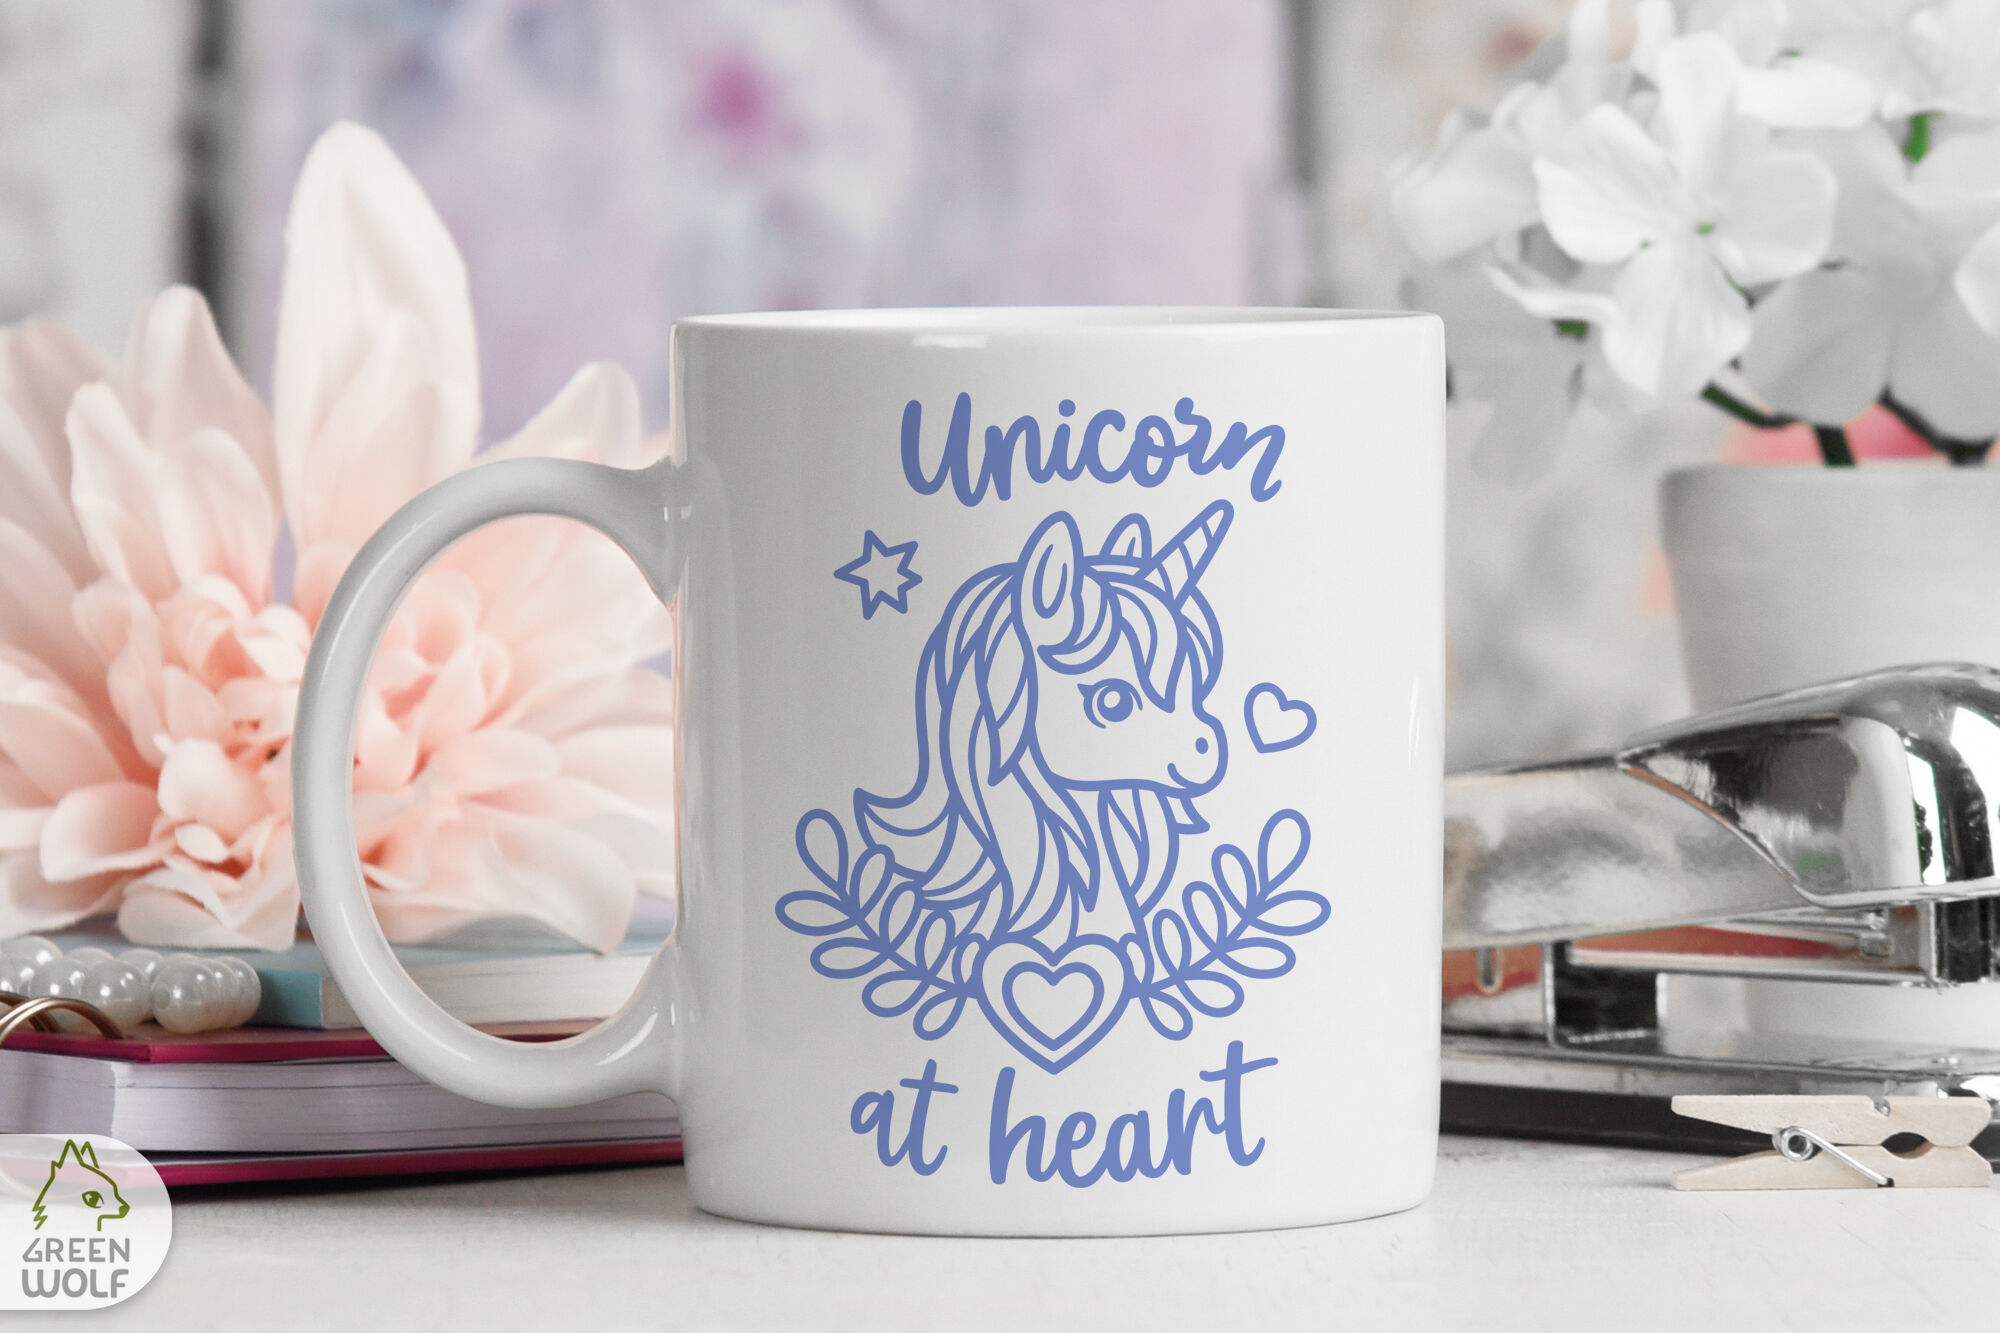 Tea Cup Cute PNG & SVG Design For T-Shirts